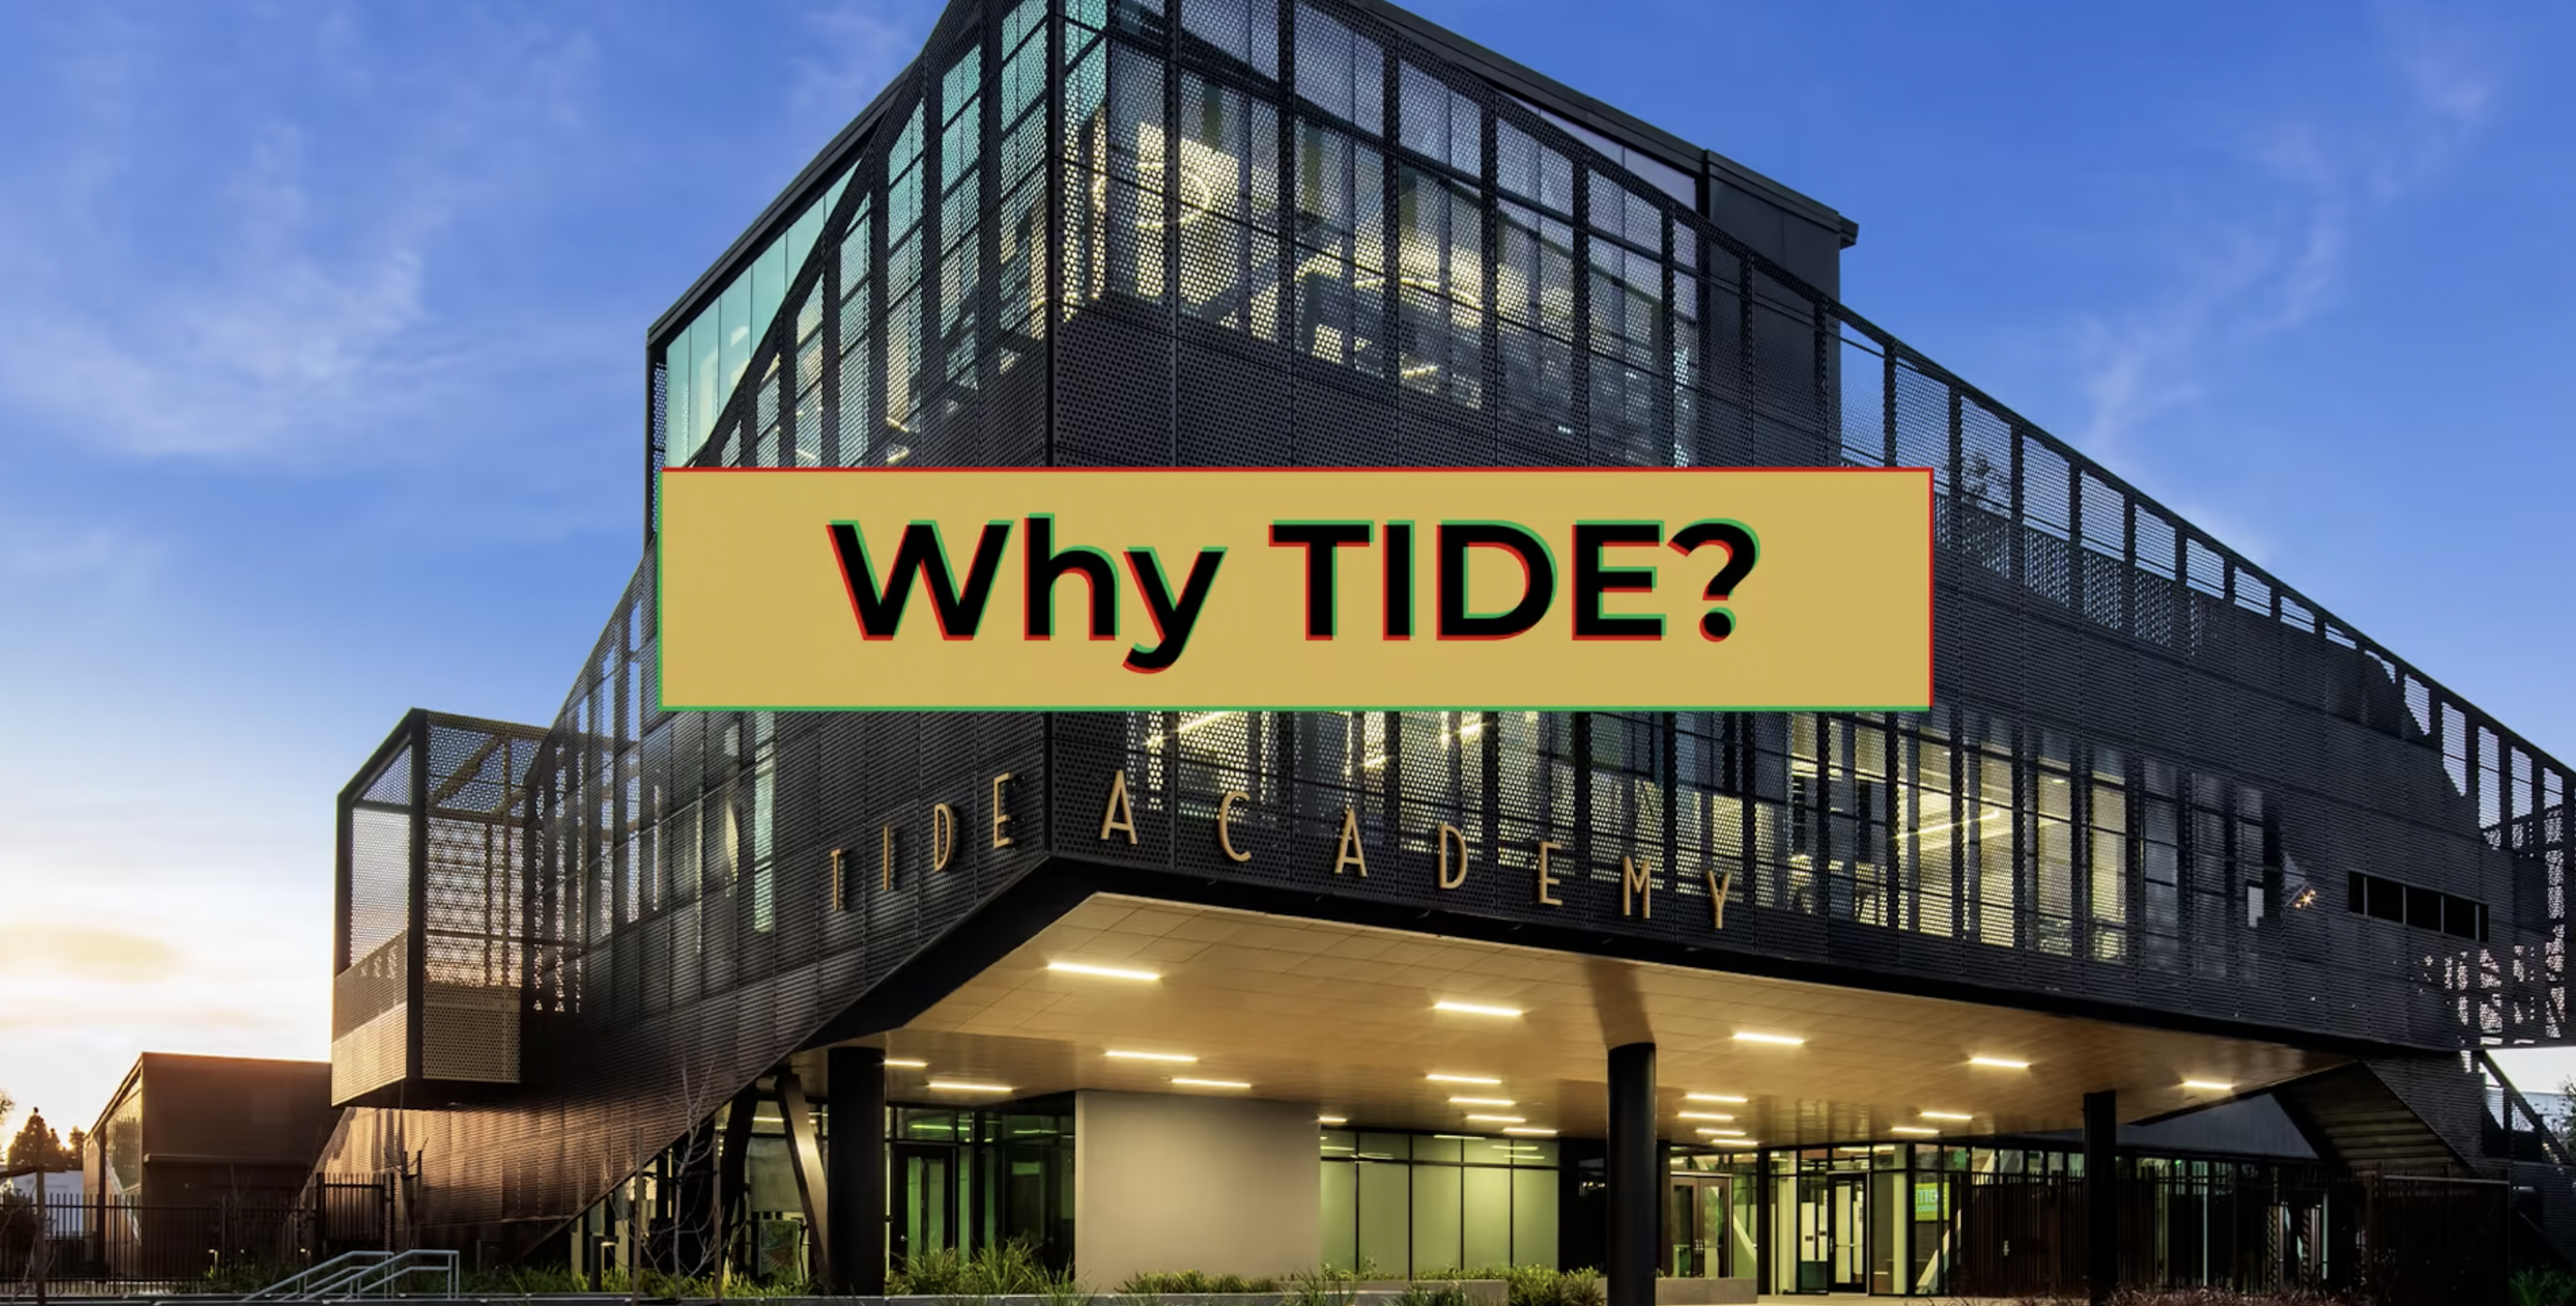 TIDE ACADEMY: WHY TIDE?